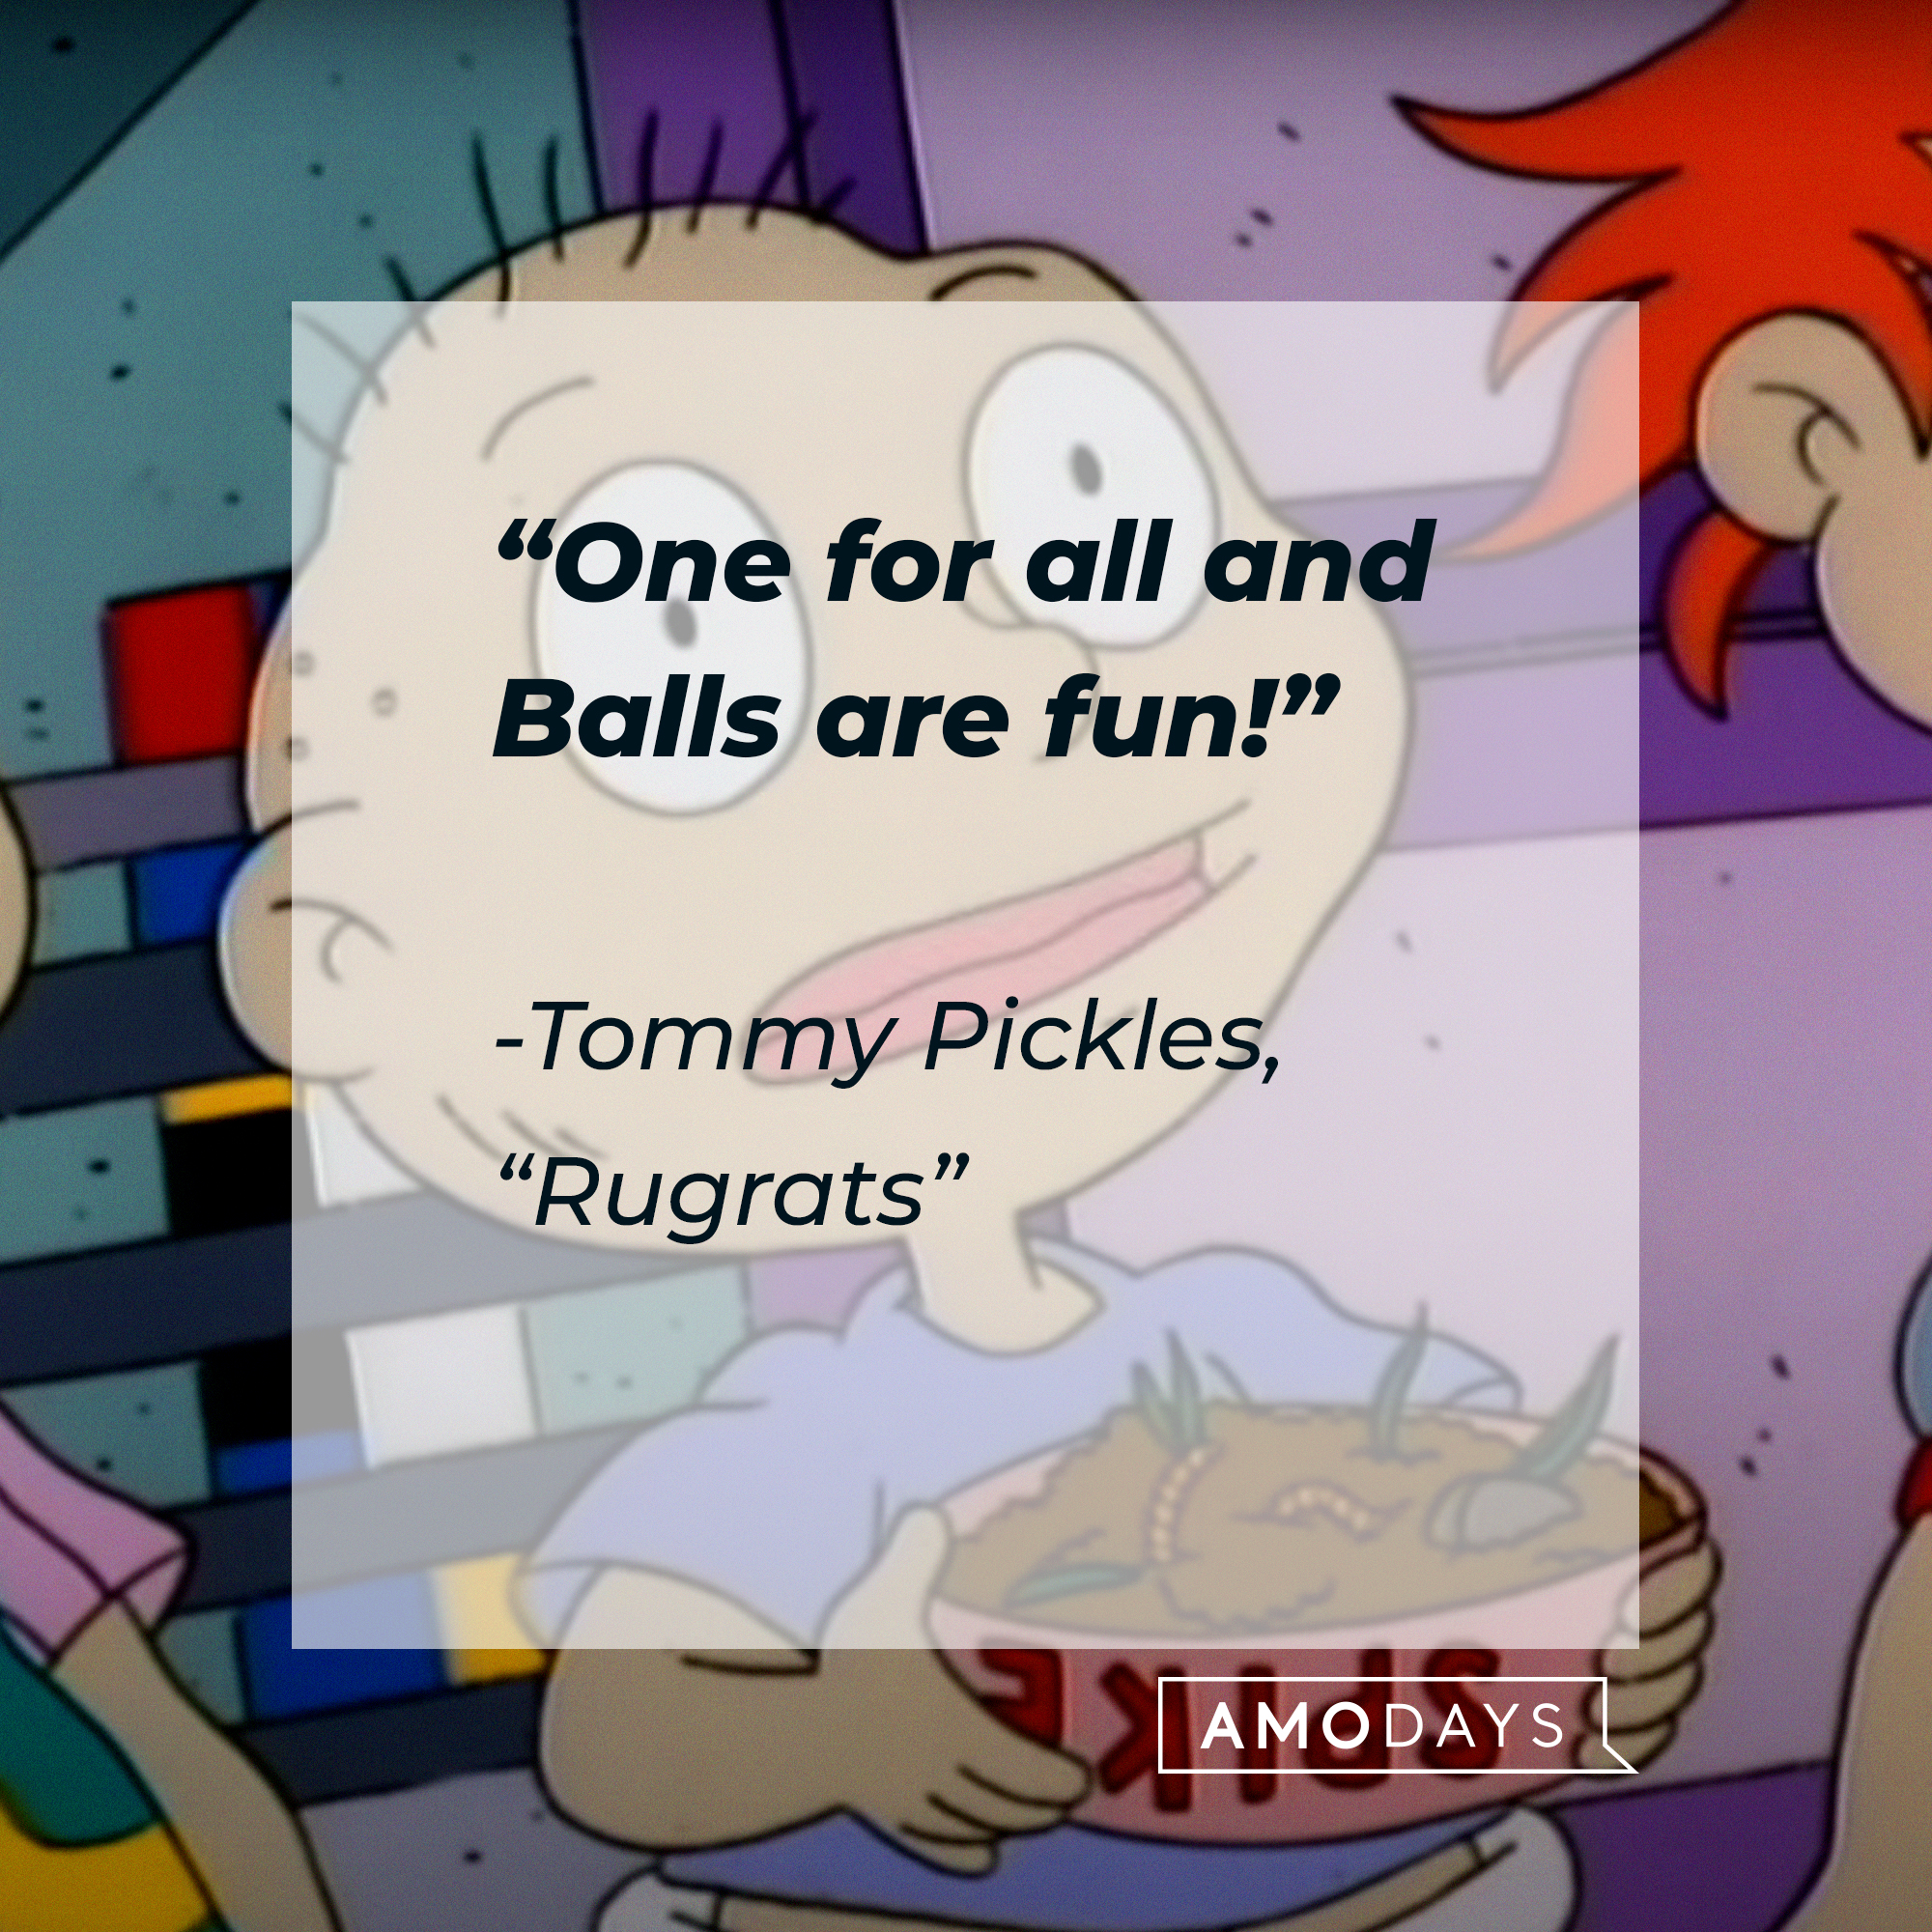 Tommy Pickes with his quote: “One for all and Balls are fun!” | Source: Facebook.com/Rugrats